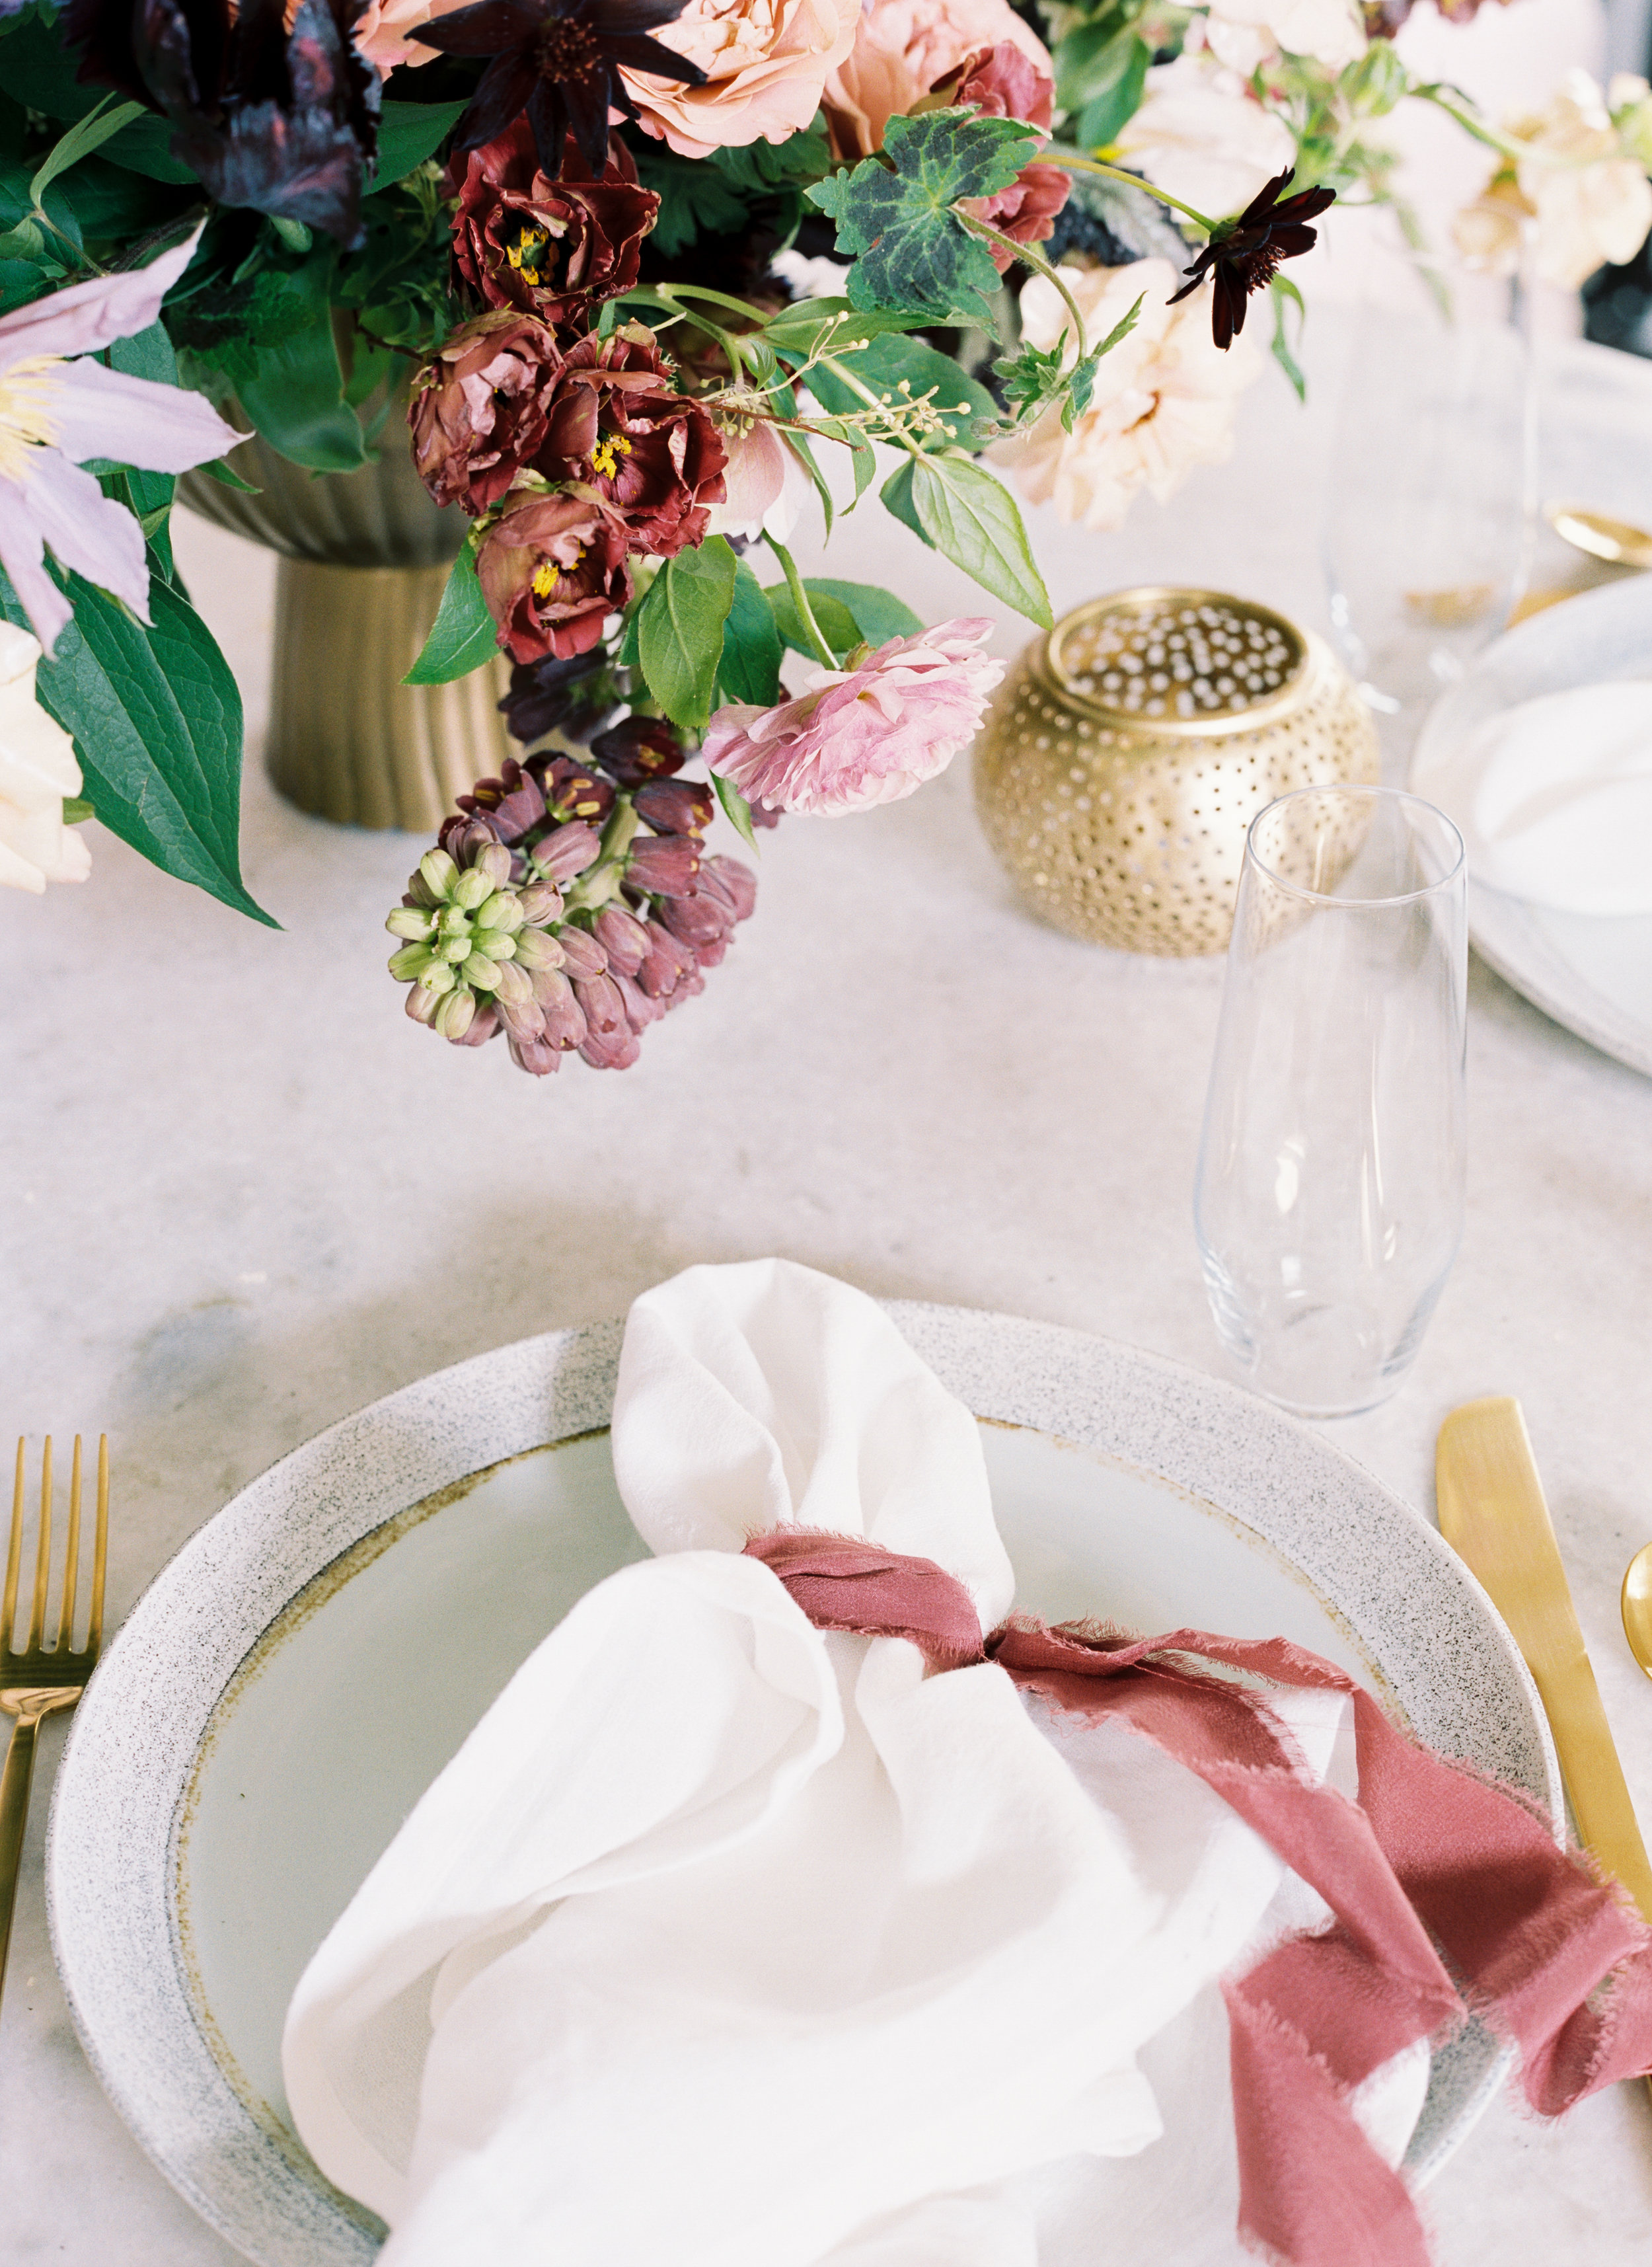 Gold flatware, rusty rose silk ribbon, and marble tabletop. April wedding flowers inspiration from a Nashville florist, Rosemary & Finch.